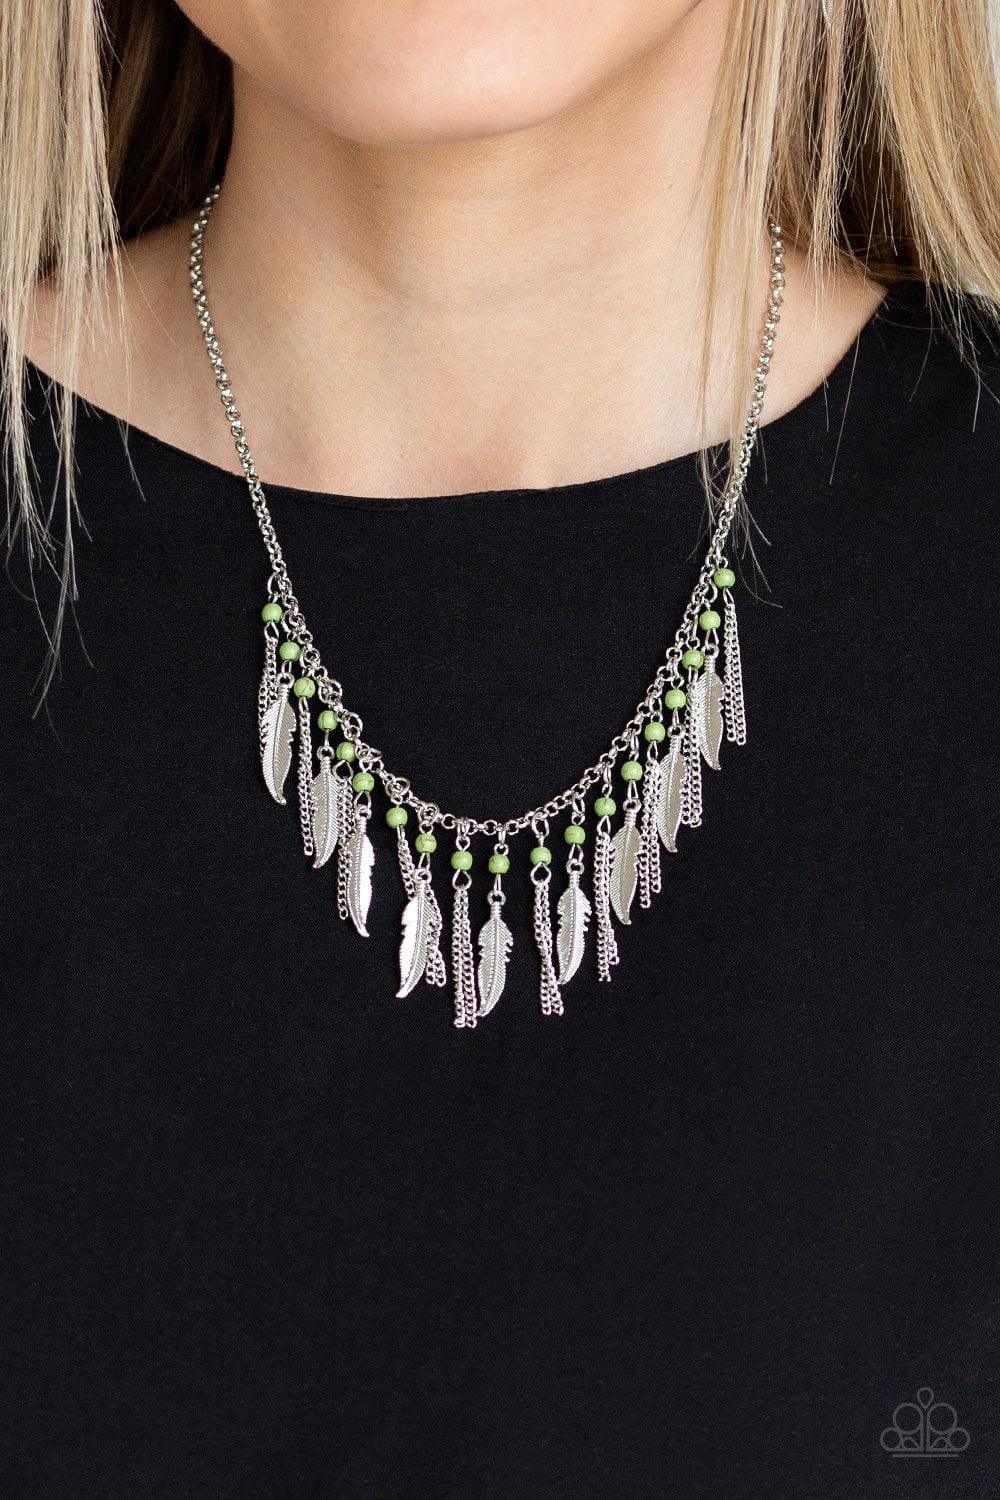 Paparazzi Accessories - Feathered Ferocity - Green Necklace - Bling by JessieK